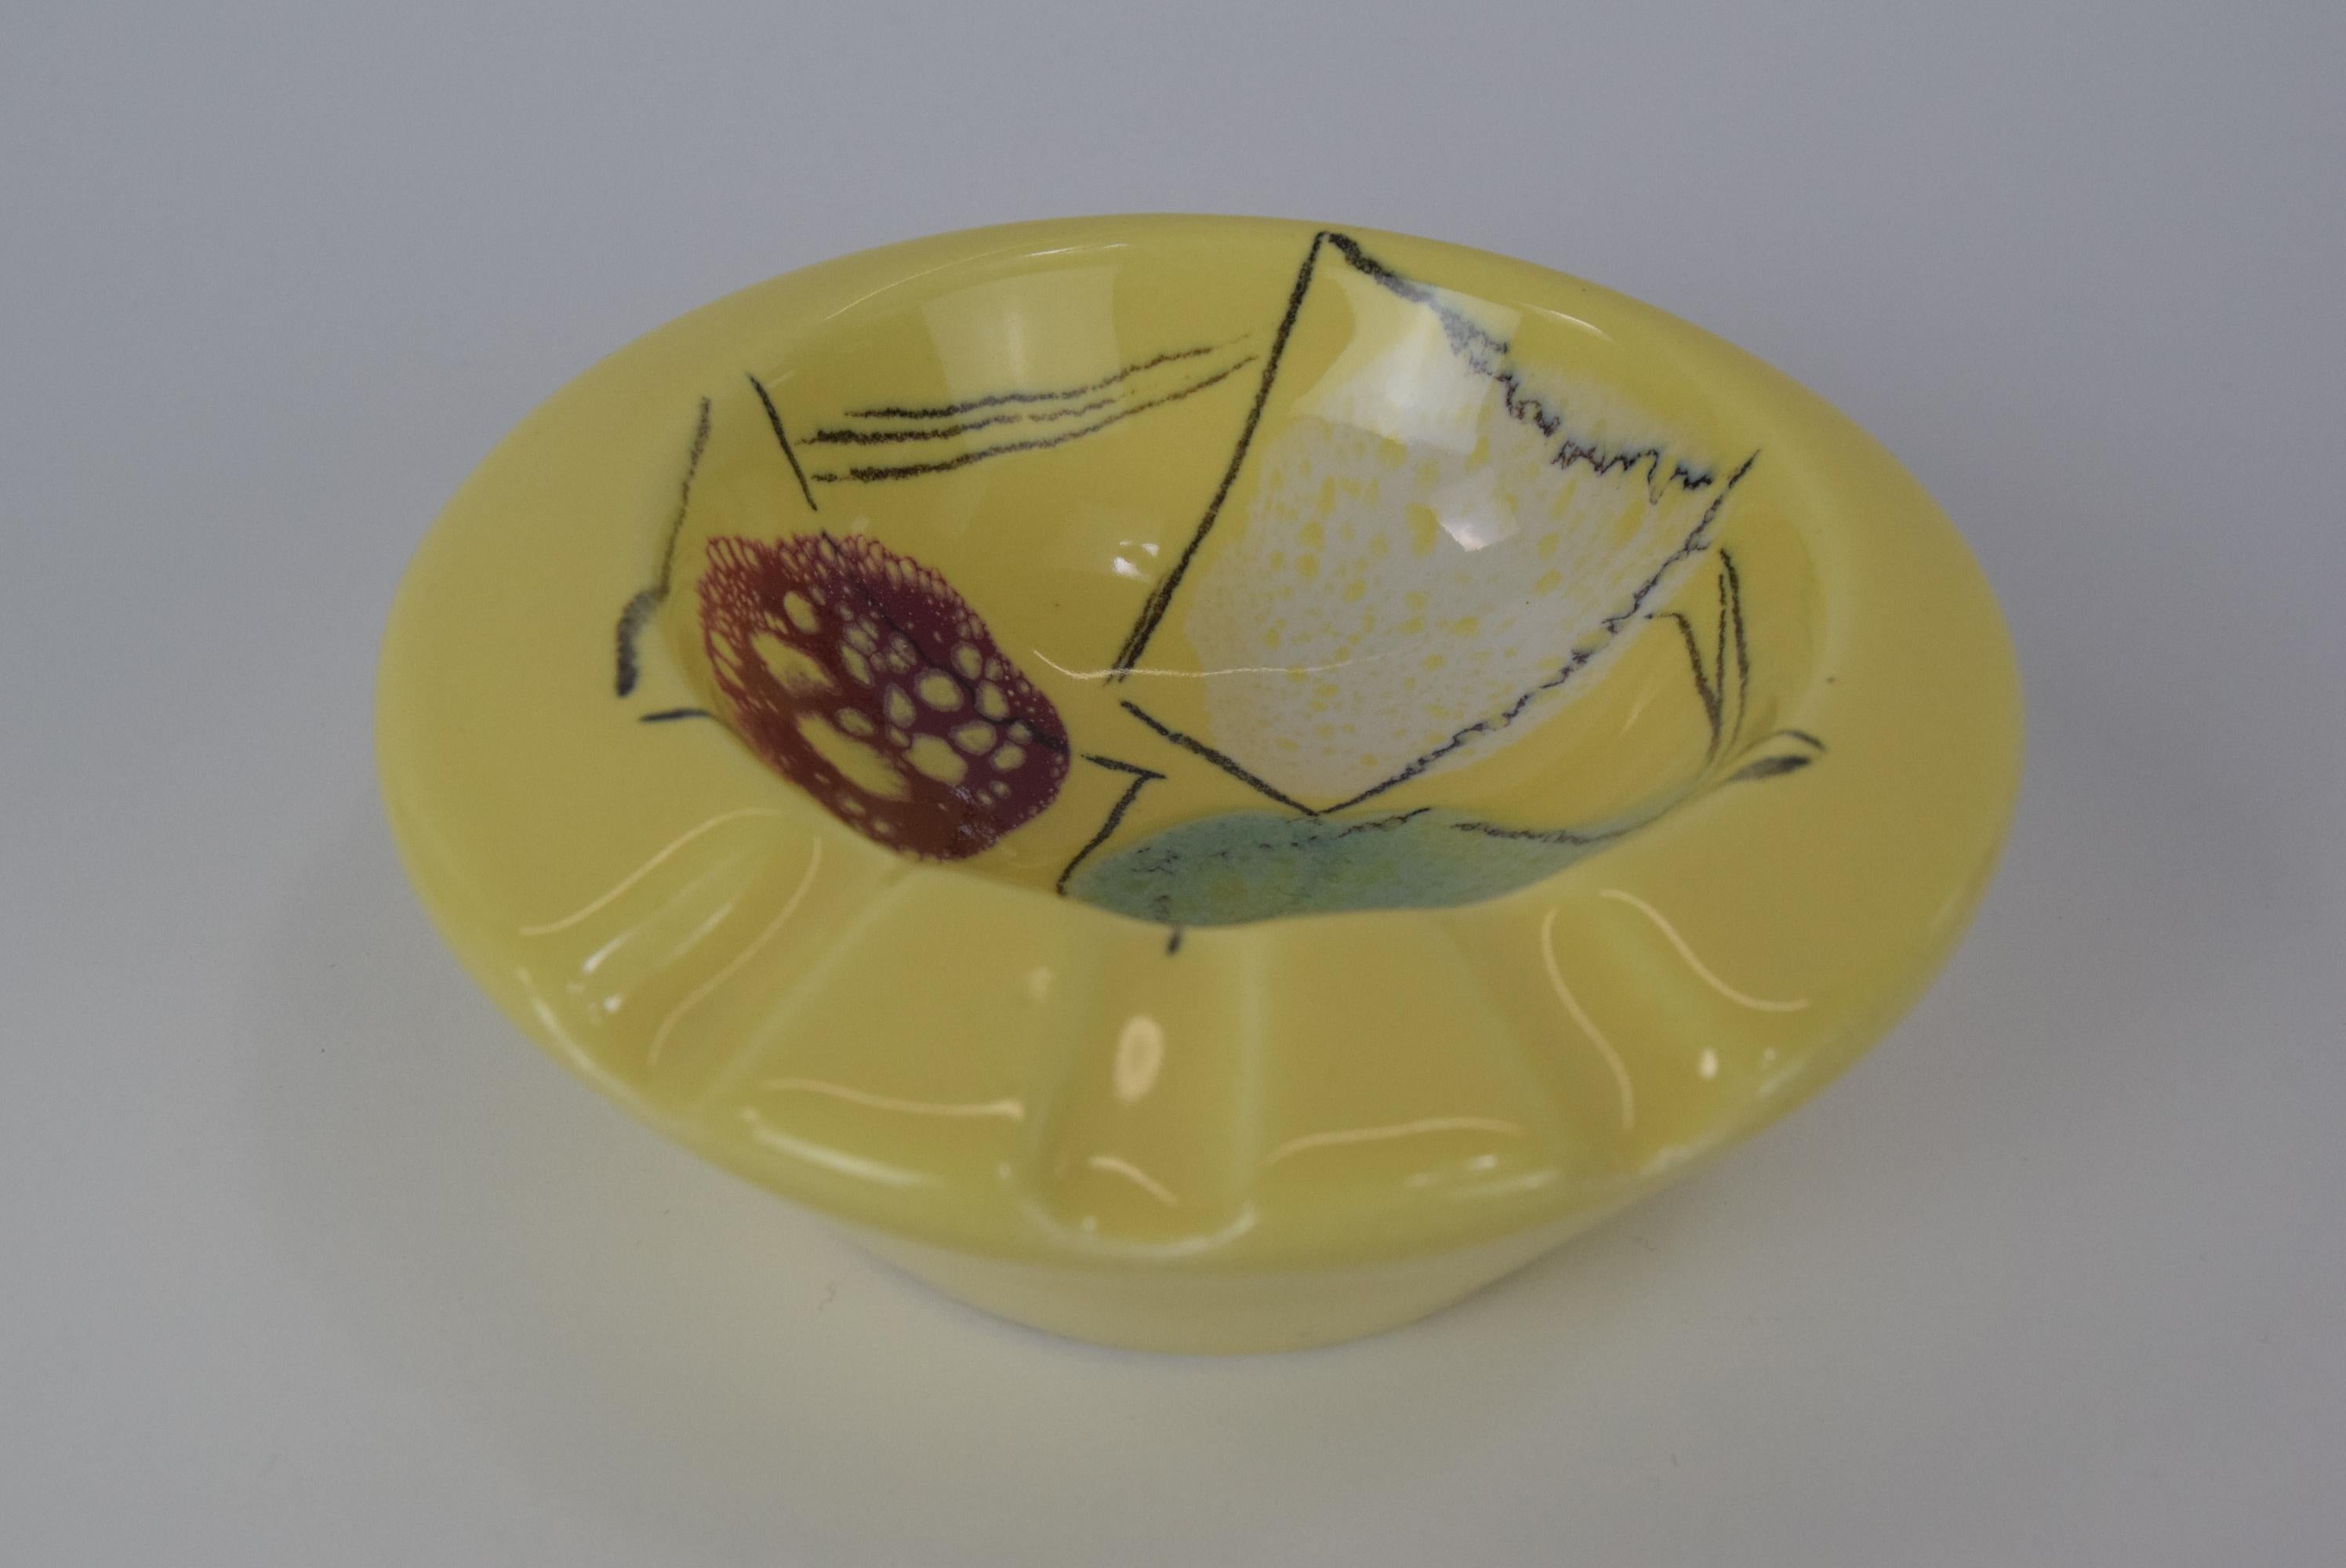 
Vintage ceramic Ashtray produced by Ditmar Urbach in Chechoslovakia 
Made of Glazed,Ceramic
Good Original Condition